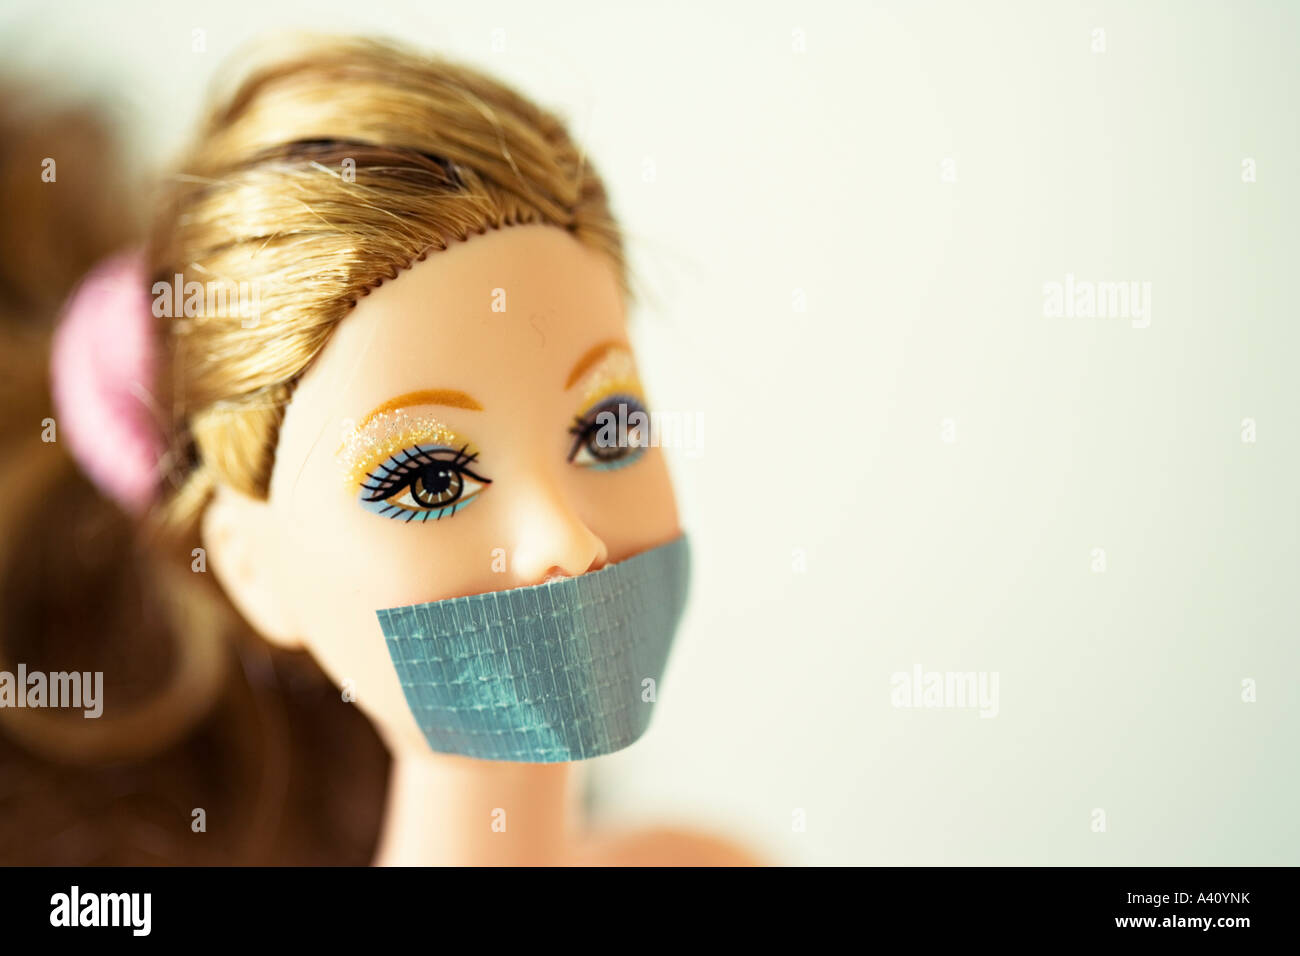 essence Reizen het dossier Barbie doll with Gaffa tape over mouth Stock Photo - Alamy